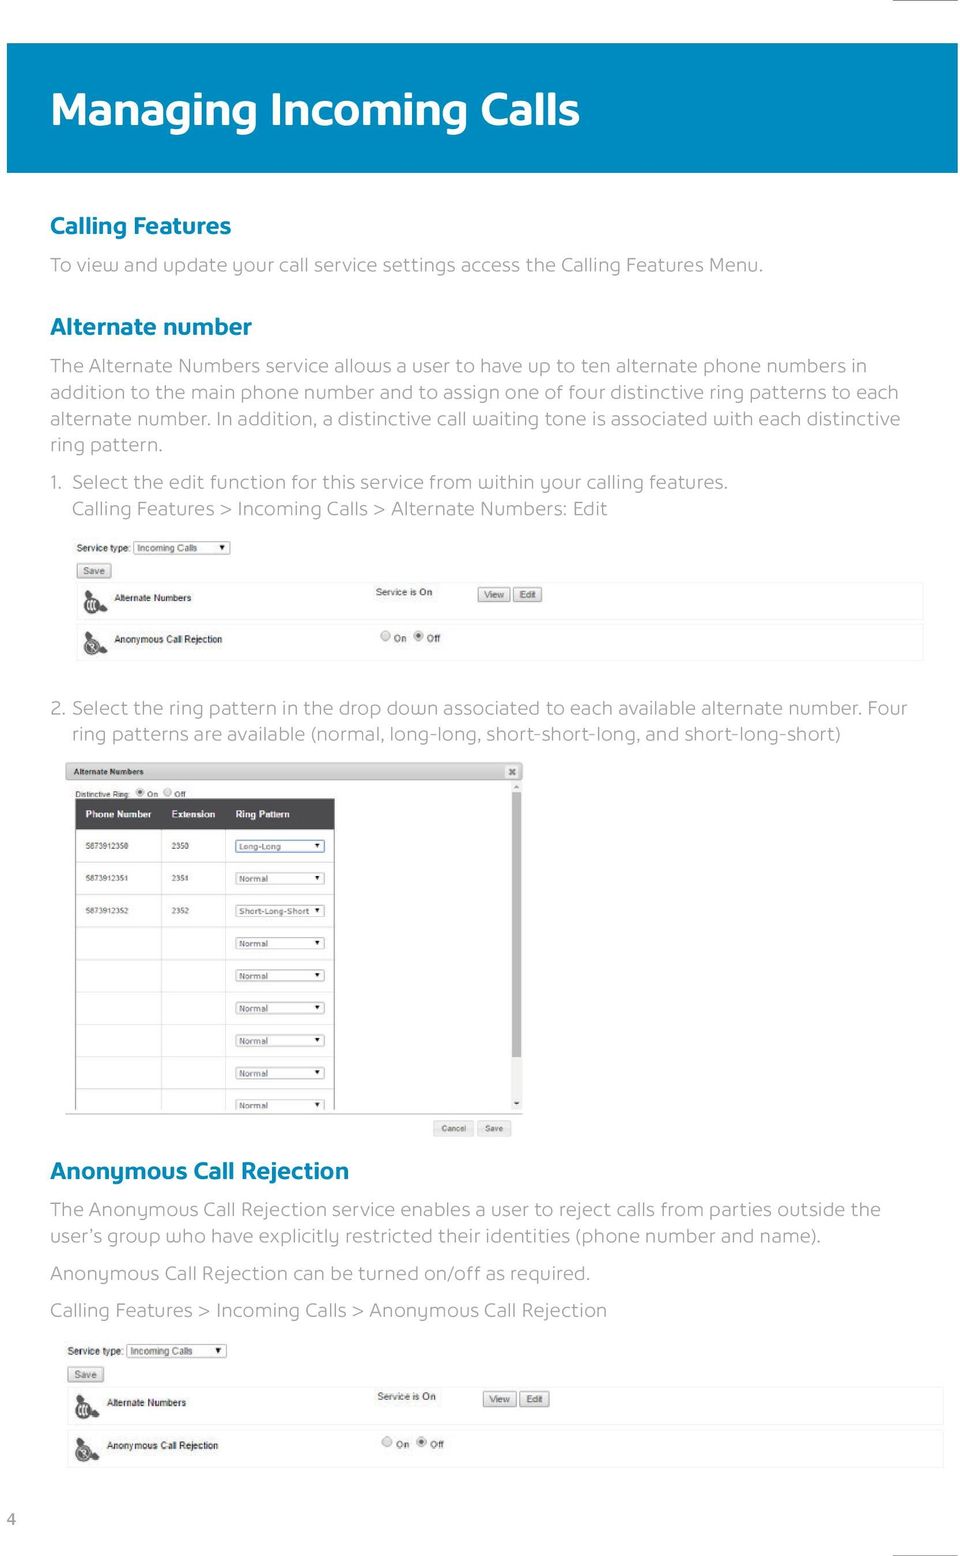 alternate number. In addition, a distinctive call waiting tone is associated with each distinctive ring pattern. 1. Select the edit function for this service from within your calling features.